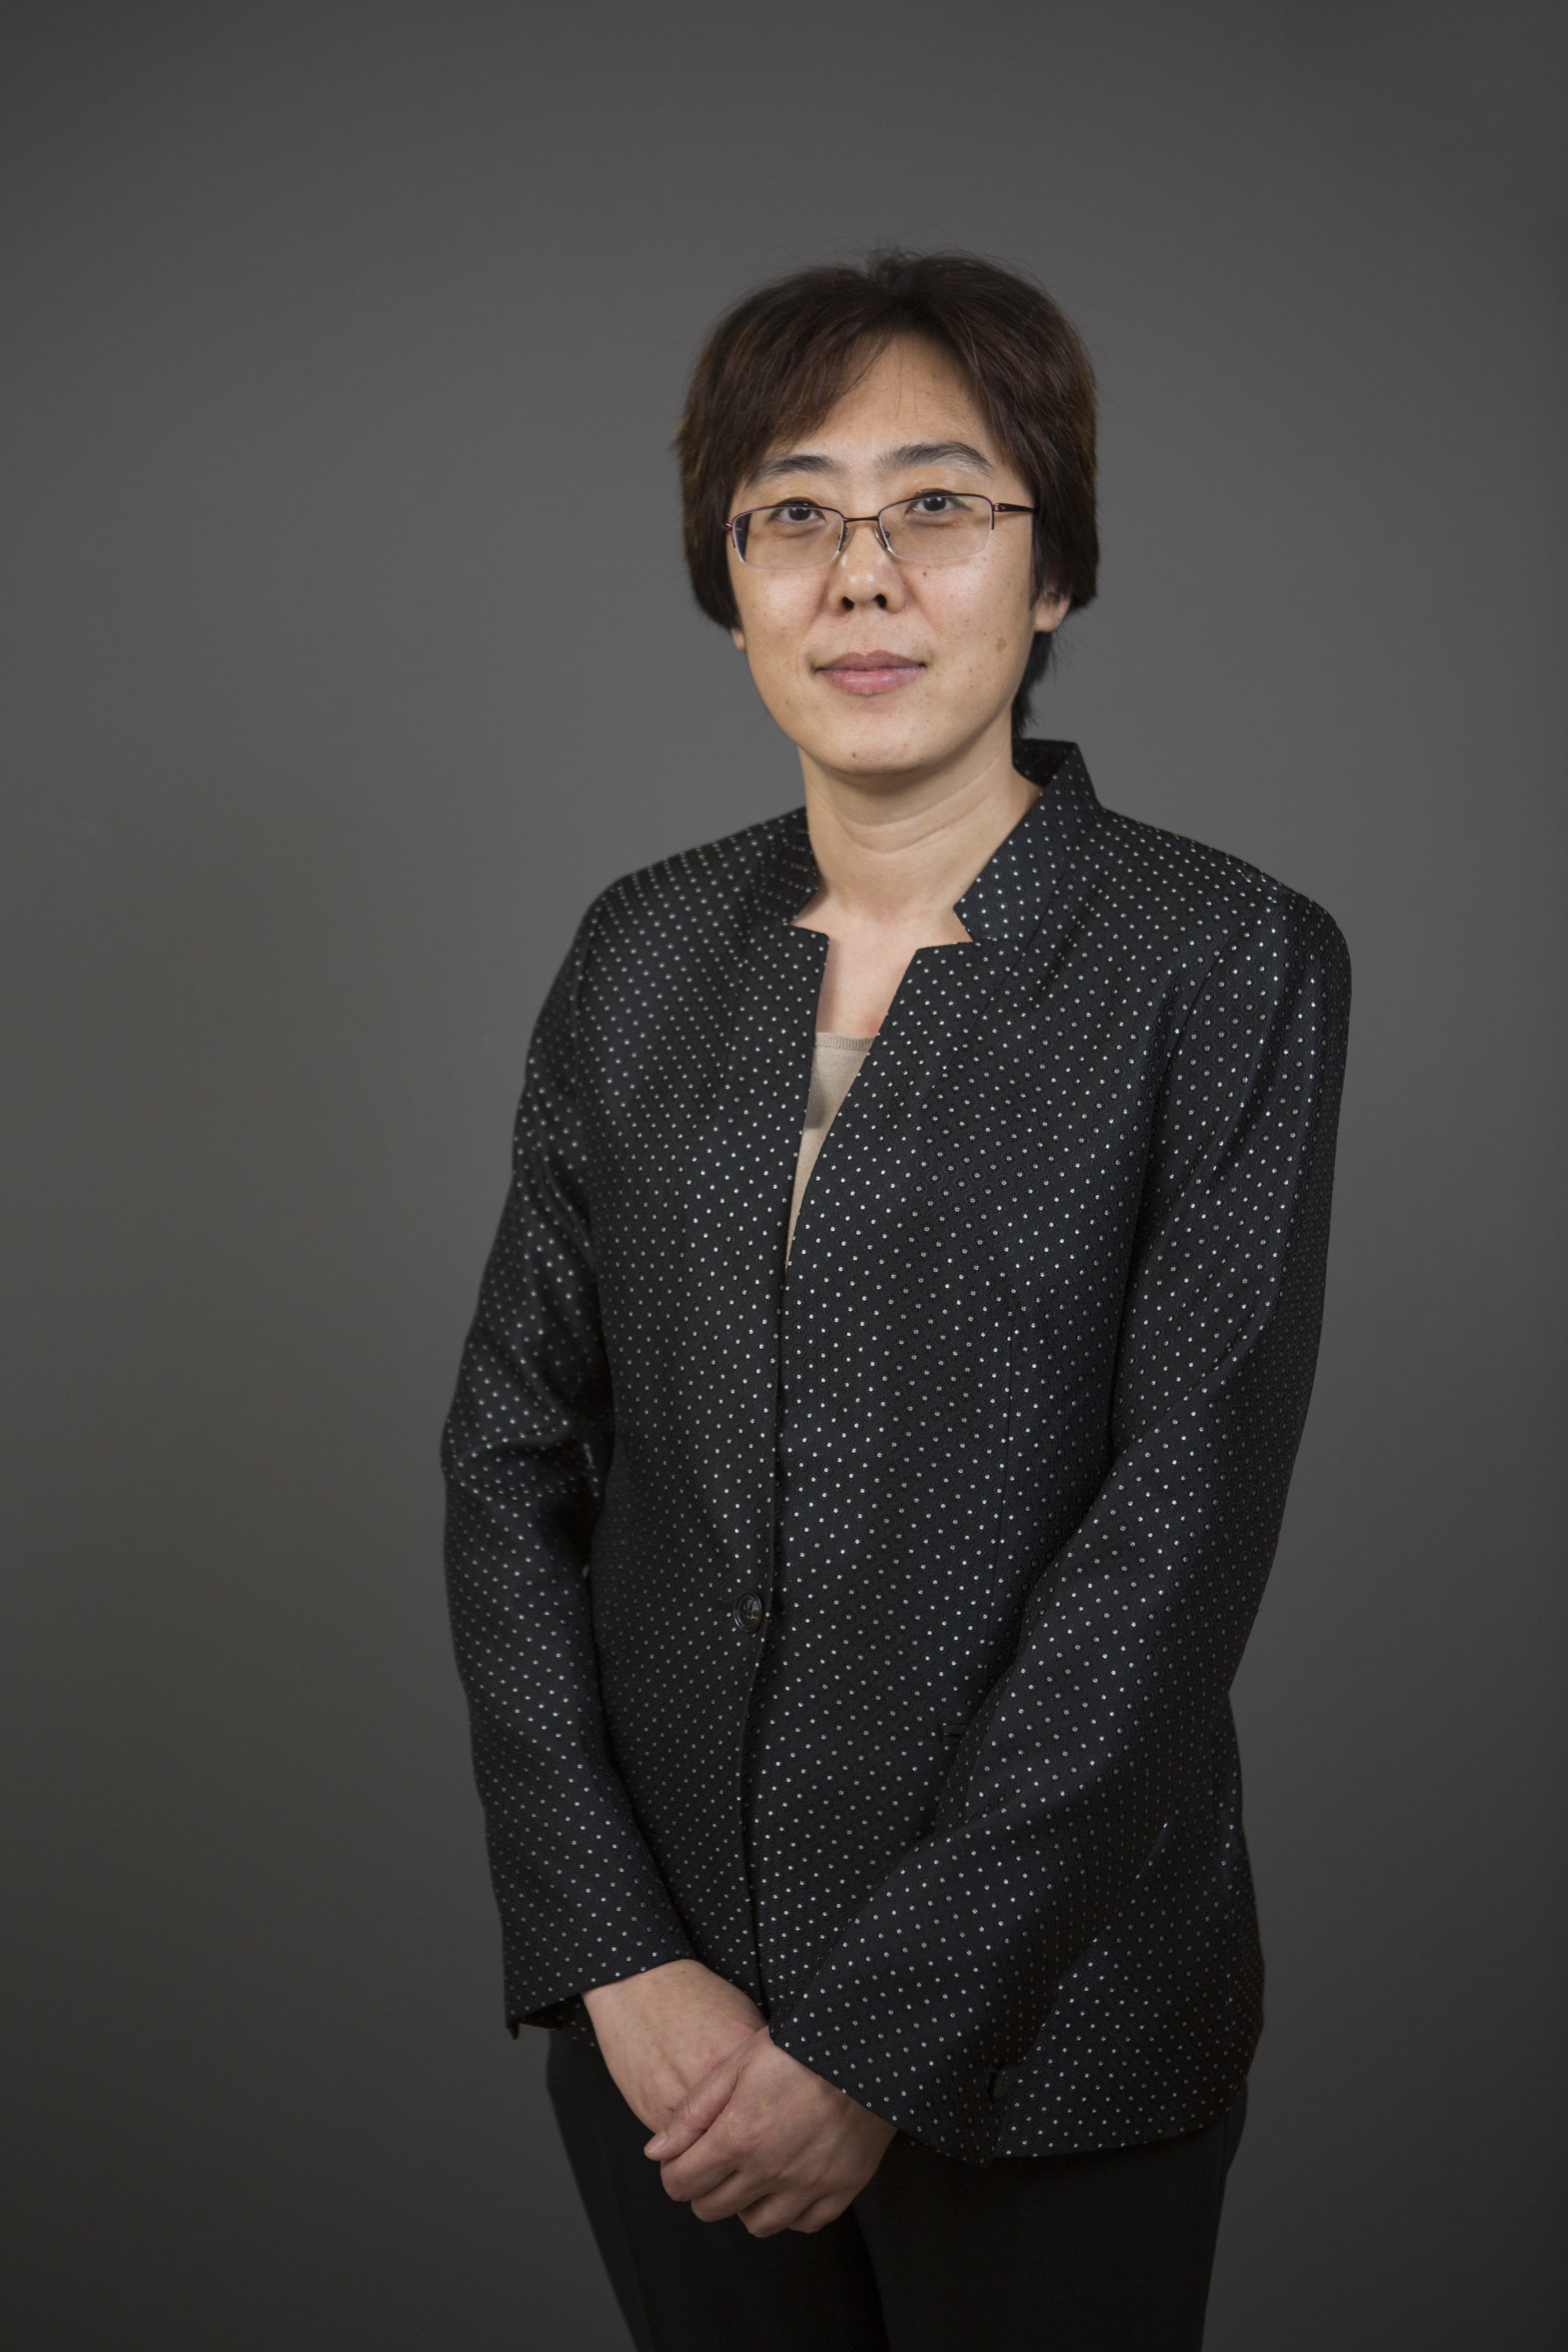 Dr. Bin Wang, chair of the Department of Information Systems 